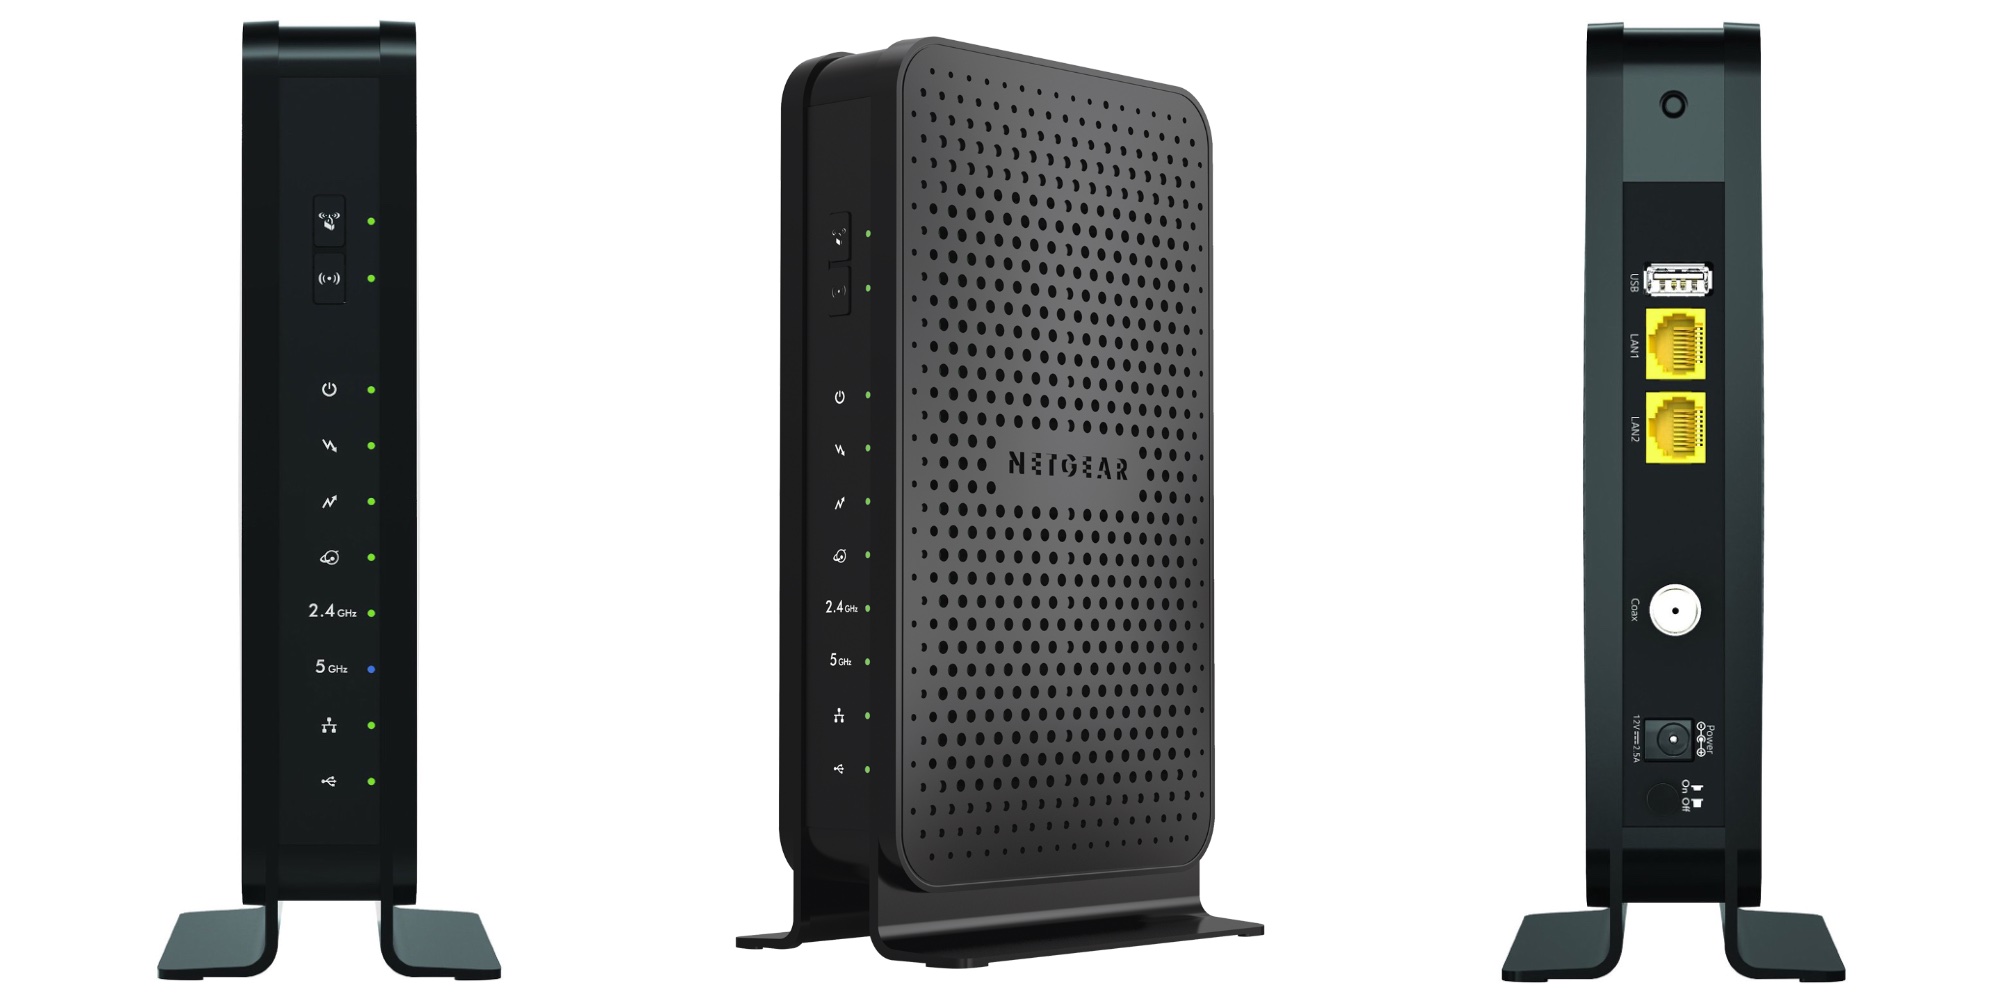 netgear-s-docsis-3-0-cable-modem-and-802-11ac-router-drops-to-90-20-off